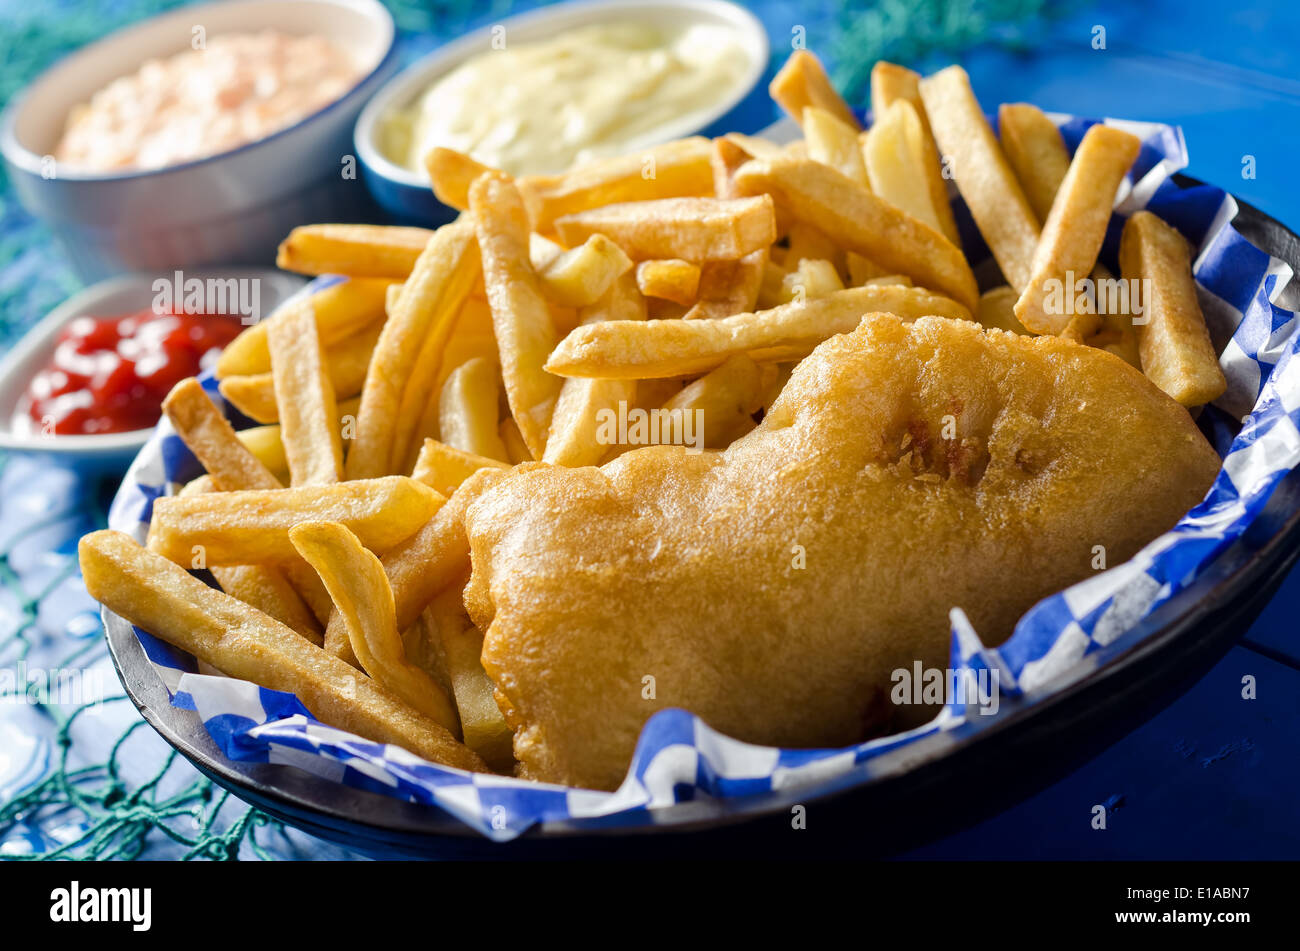 A golden delicious batter fried piece of fish with french fries, tartar sauce, coleslaw, and ketchup. Stock Photo